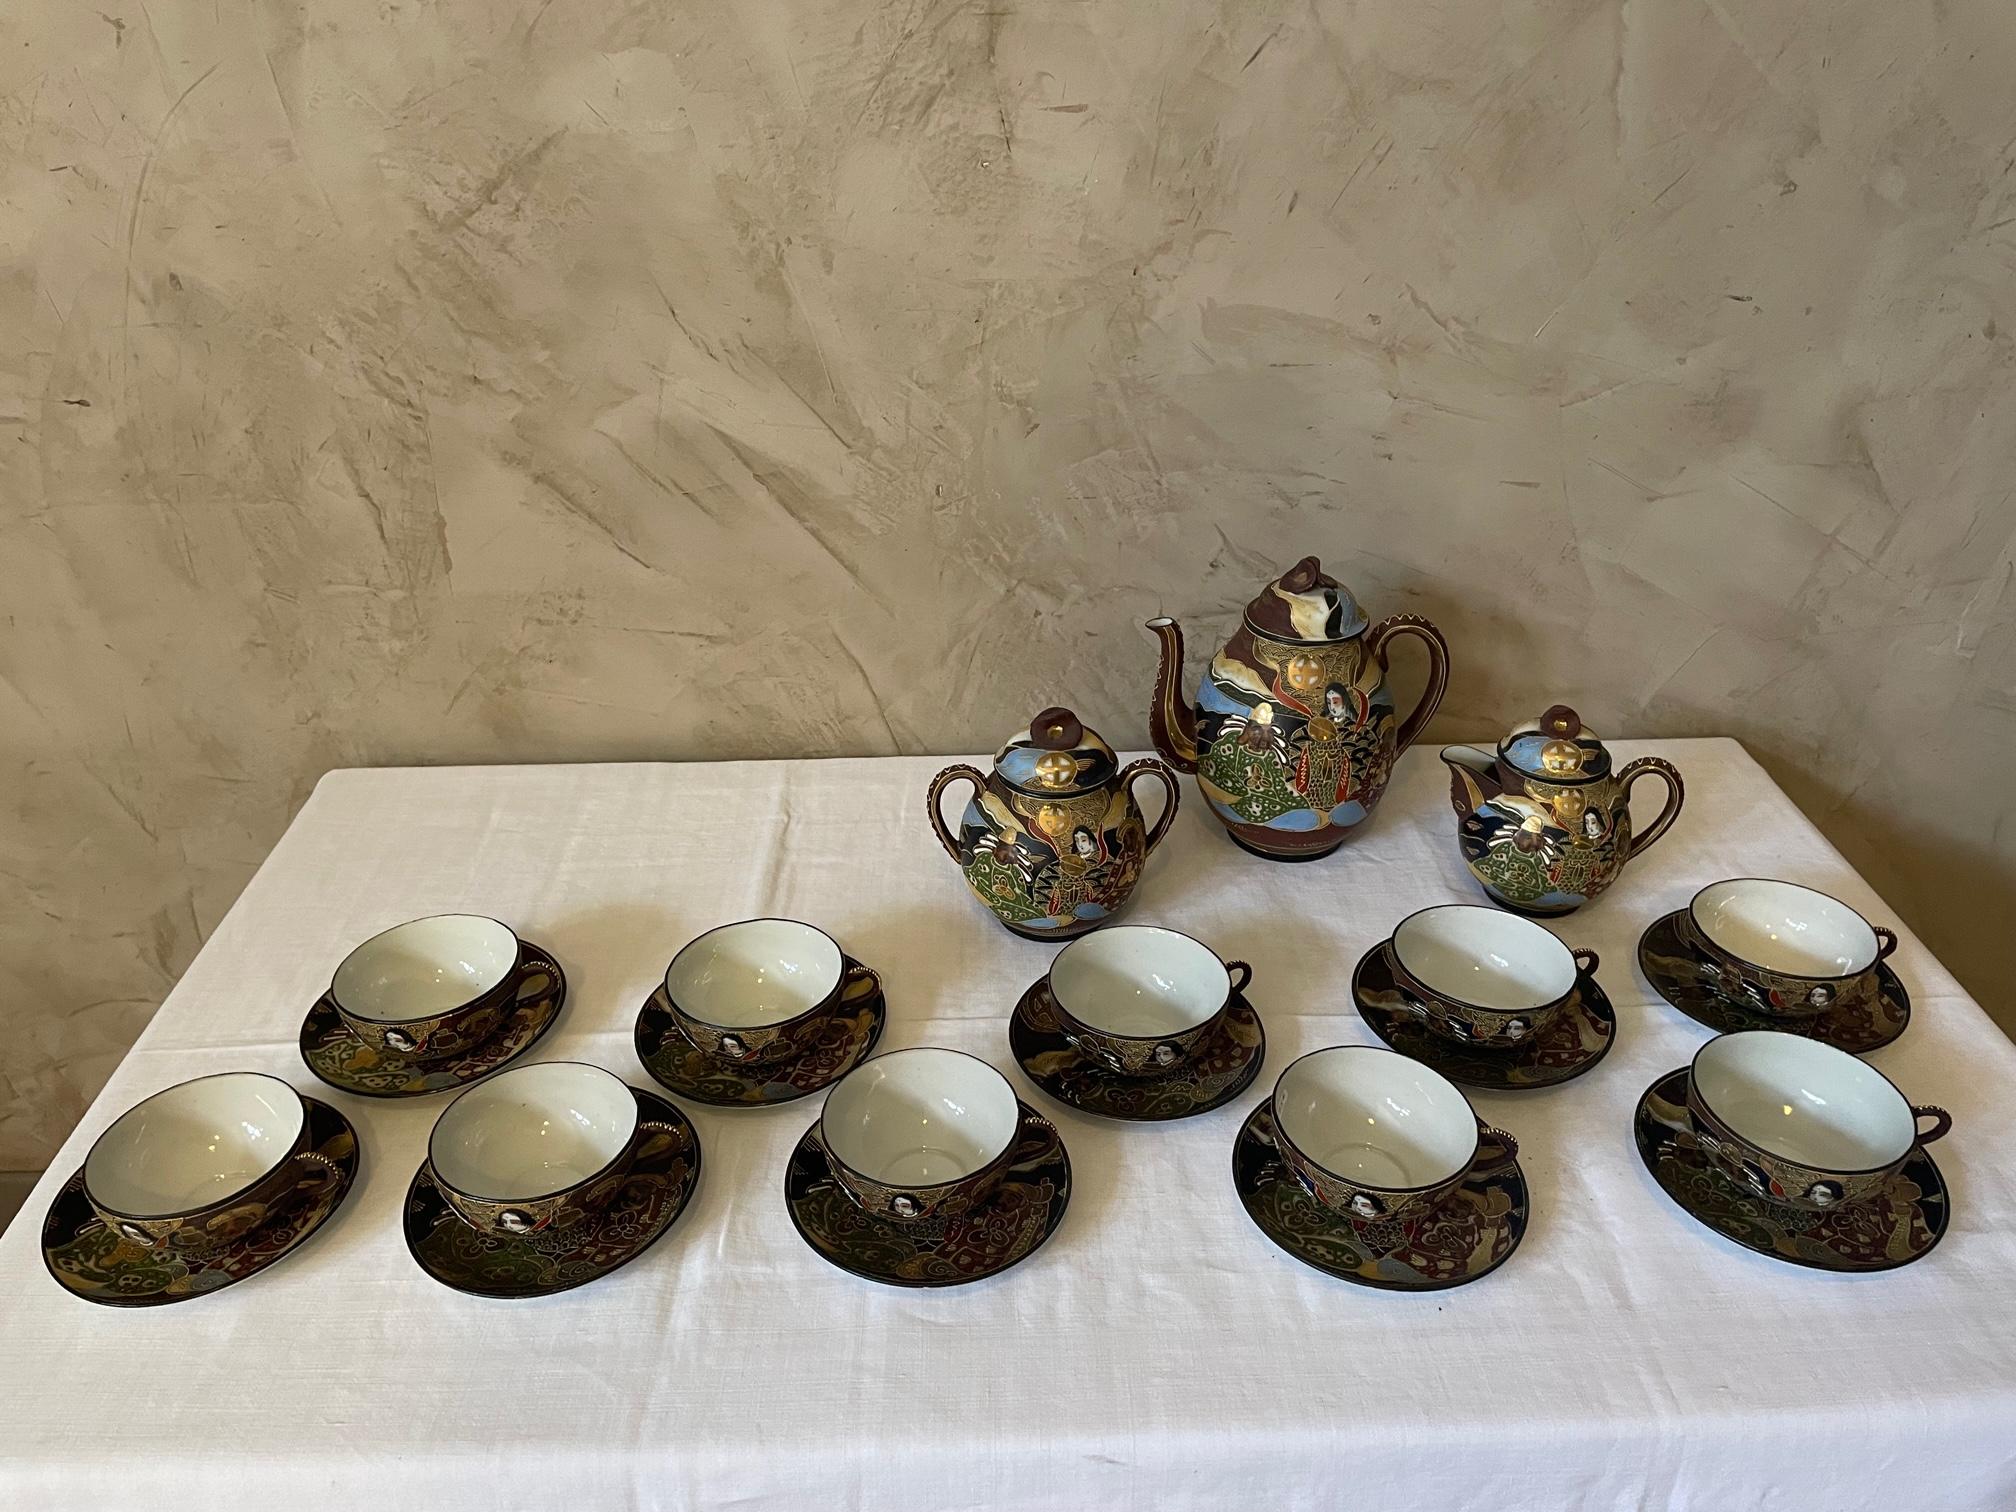 Beautiful Satsuma fine porcelain tea set Moriage Lithophane Geisha. 
Hand painted in brown with white dots - so called moriage, gold, rust-orange and black. Geisha hand painted on each pieces. 
8 tea cups with saucers, a large tea juge, a milk and